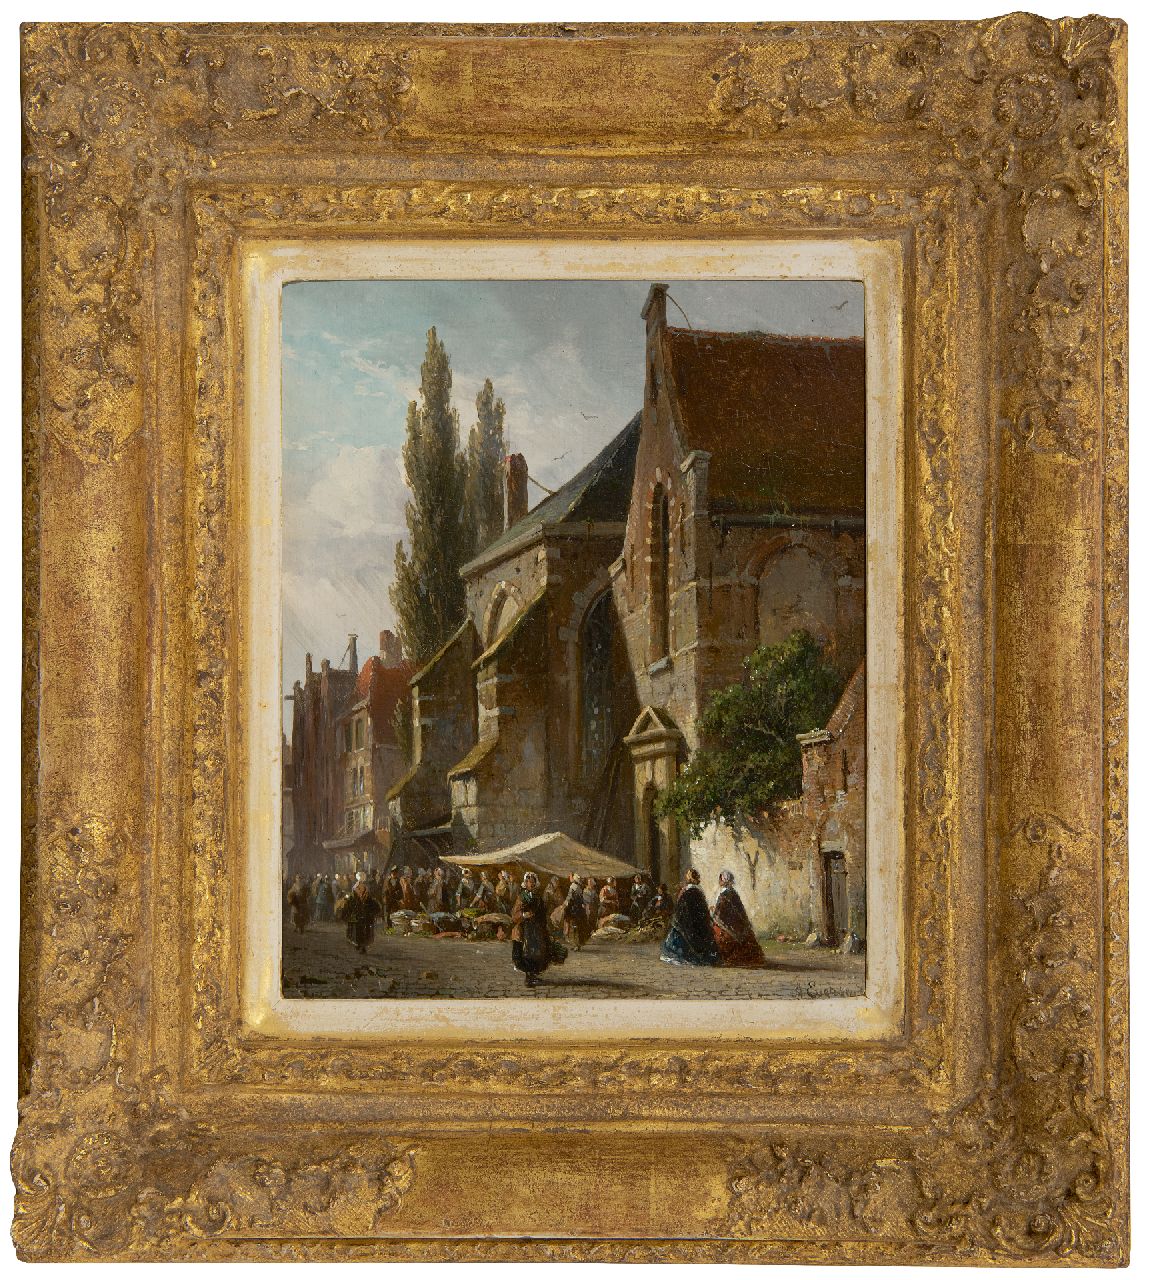 Eversen A.  | Adrianus Eversen | Paintings offered for sale | Market day at the church, oil on panel 19.0 x 15.3 cm, signed l.r.